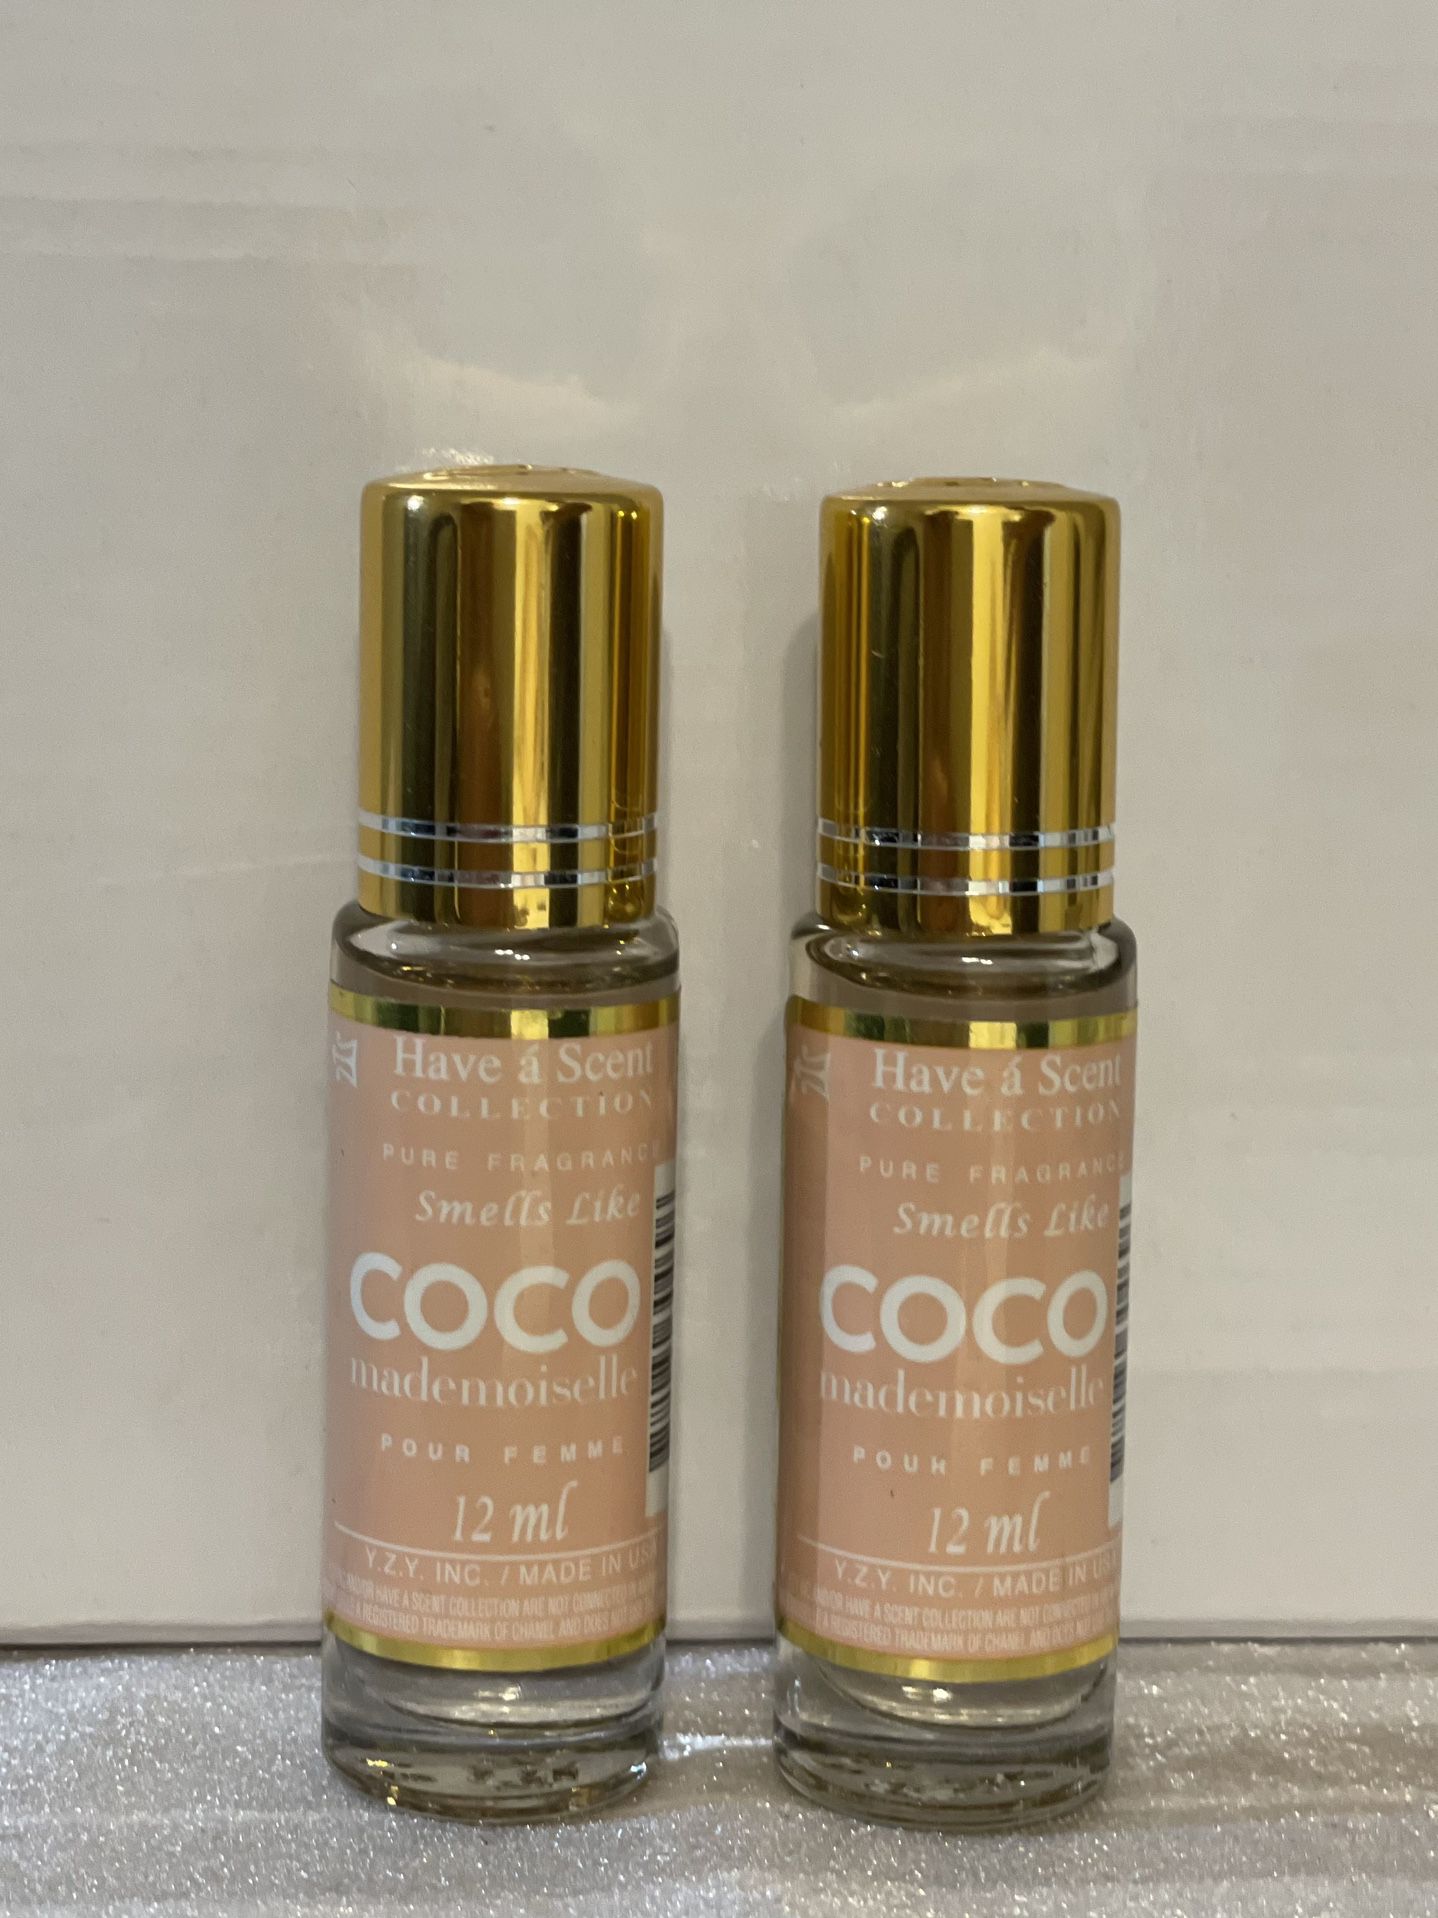 Coco Mademoiselle Perfume Rollerball Travel Size for Sale in Carol City, FL  - OfferUp